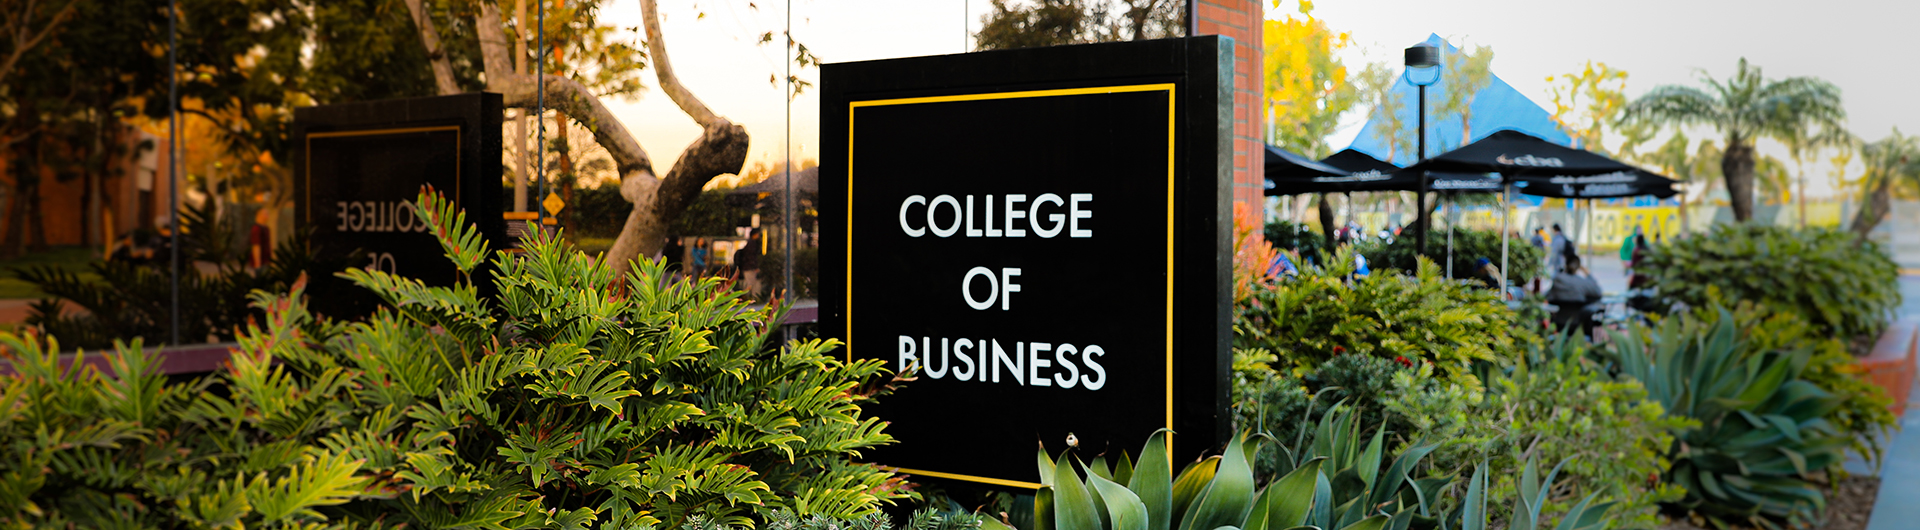 College of Business | California State University, Long Beach